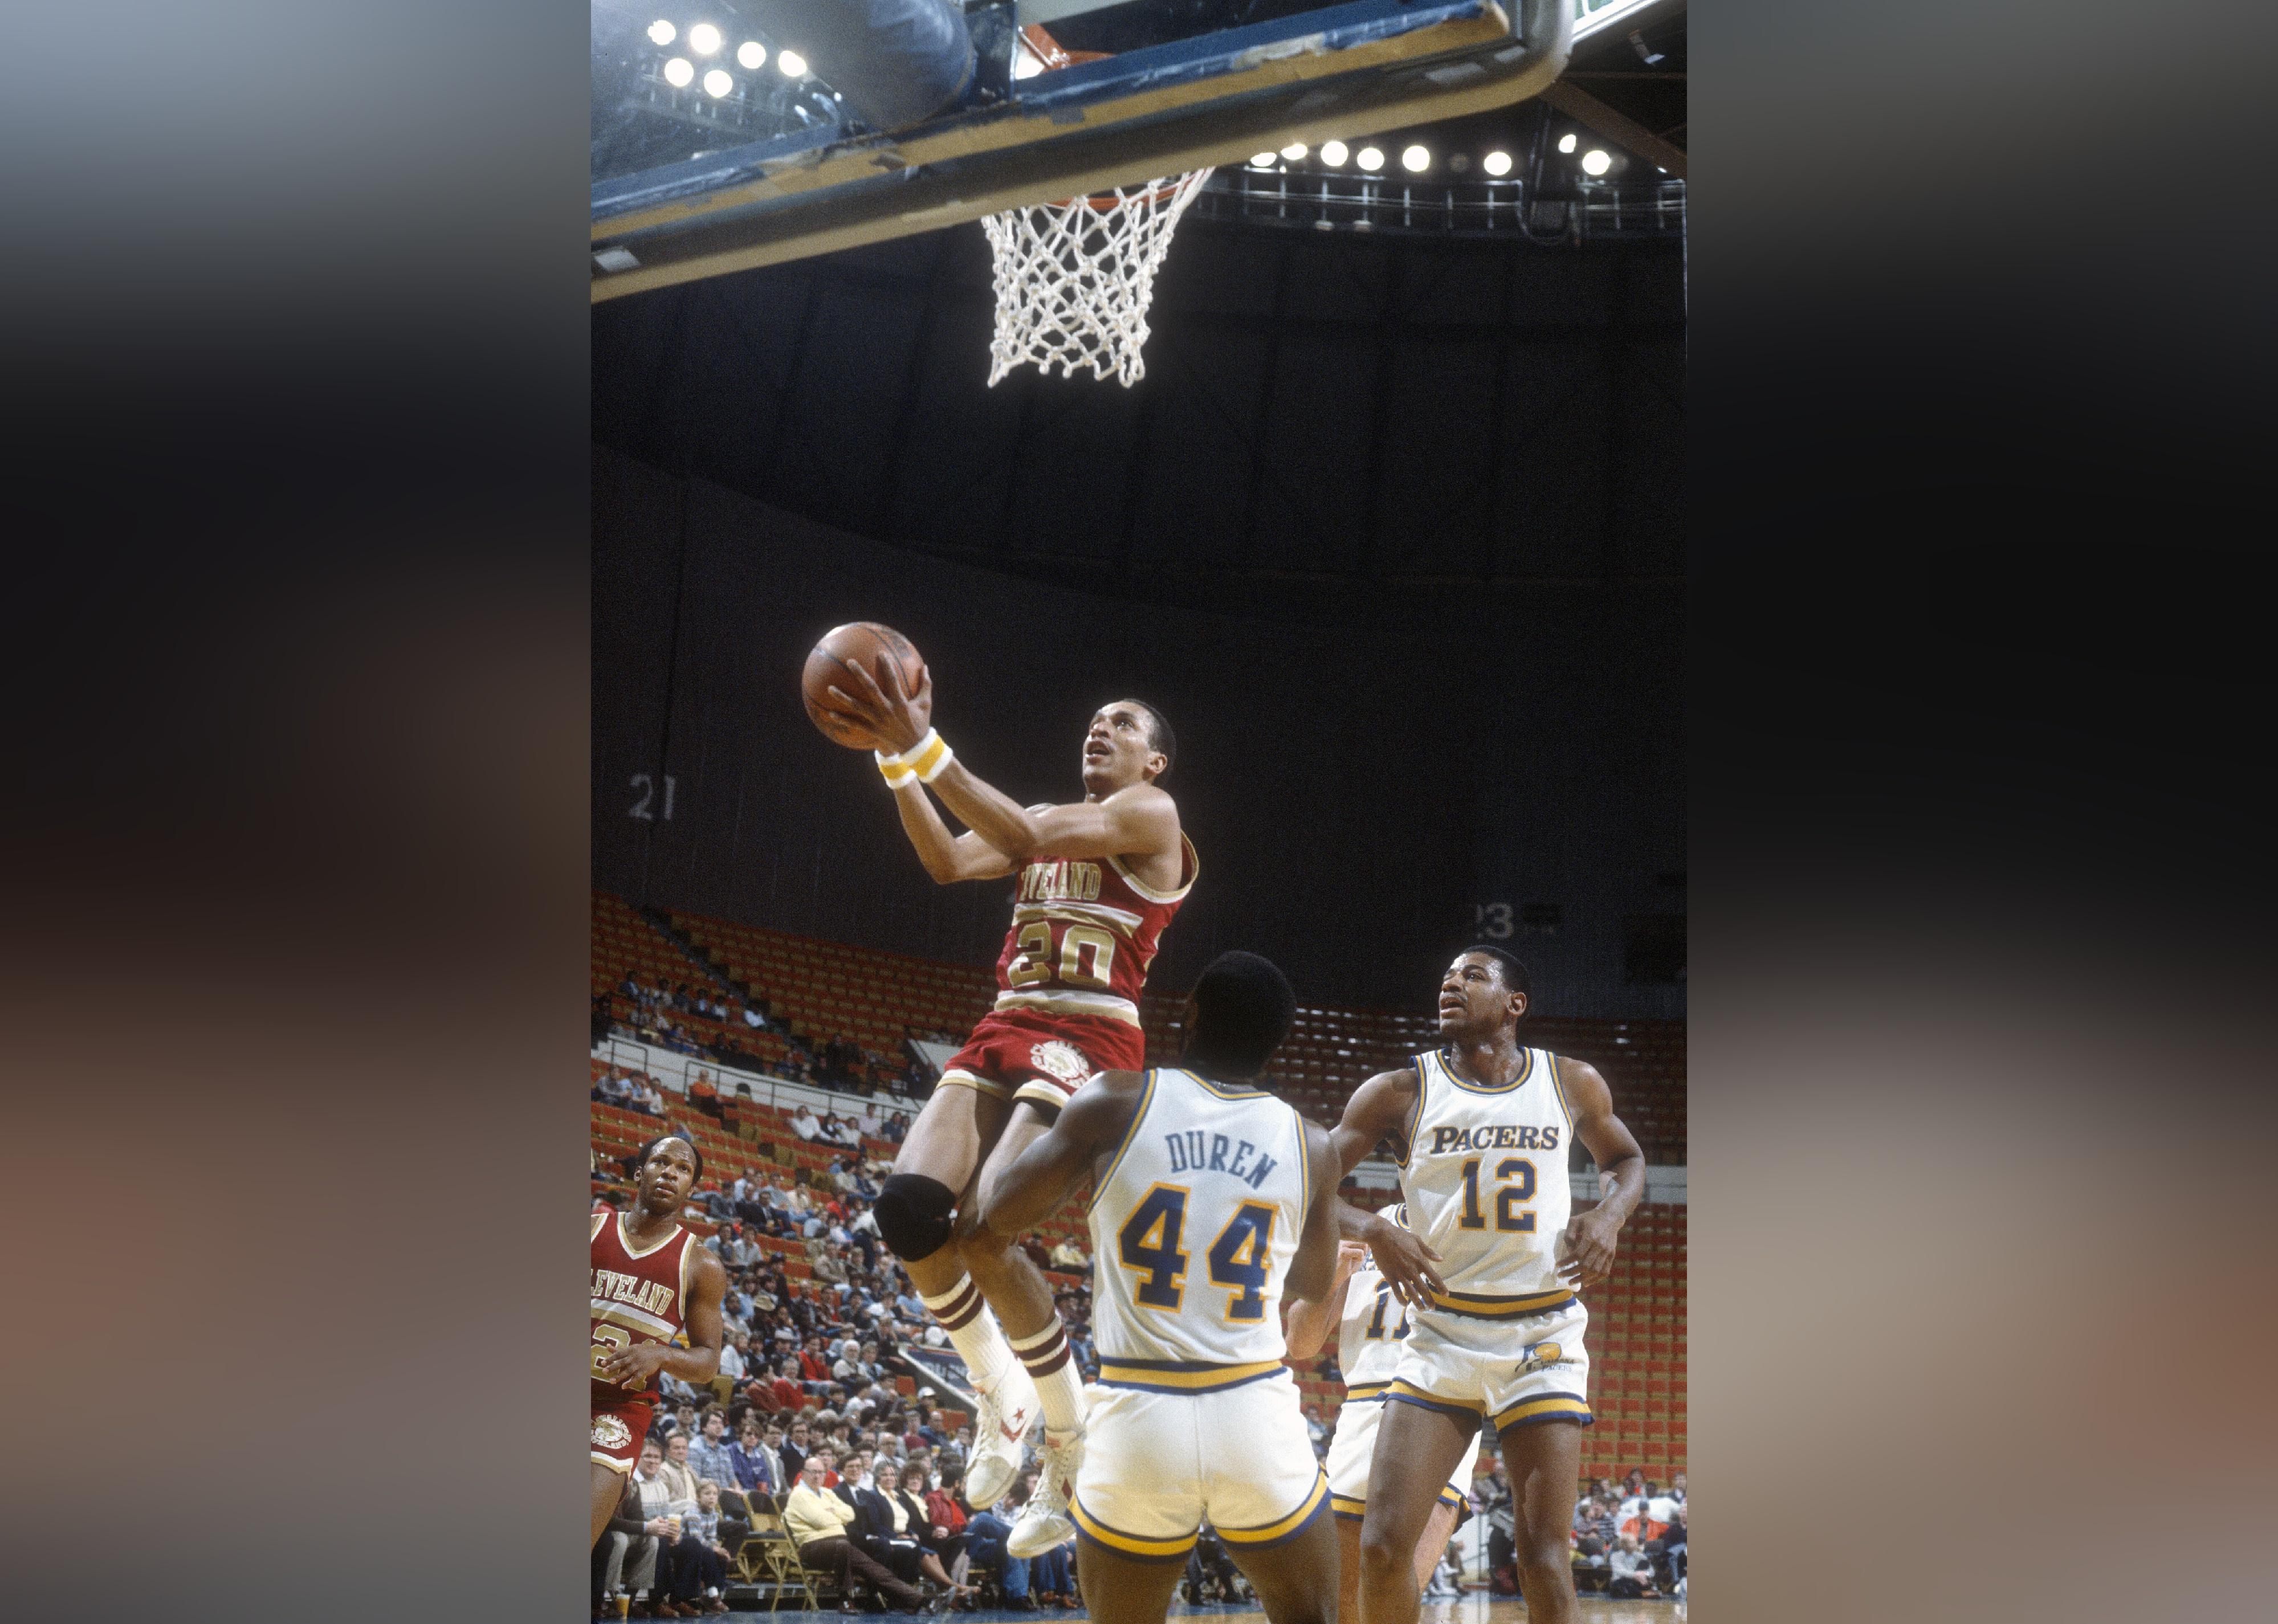 Geoff Huston of the Cleveland Cavaliers goes up to shoots over John Duren of the Indiana Pacers.